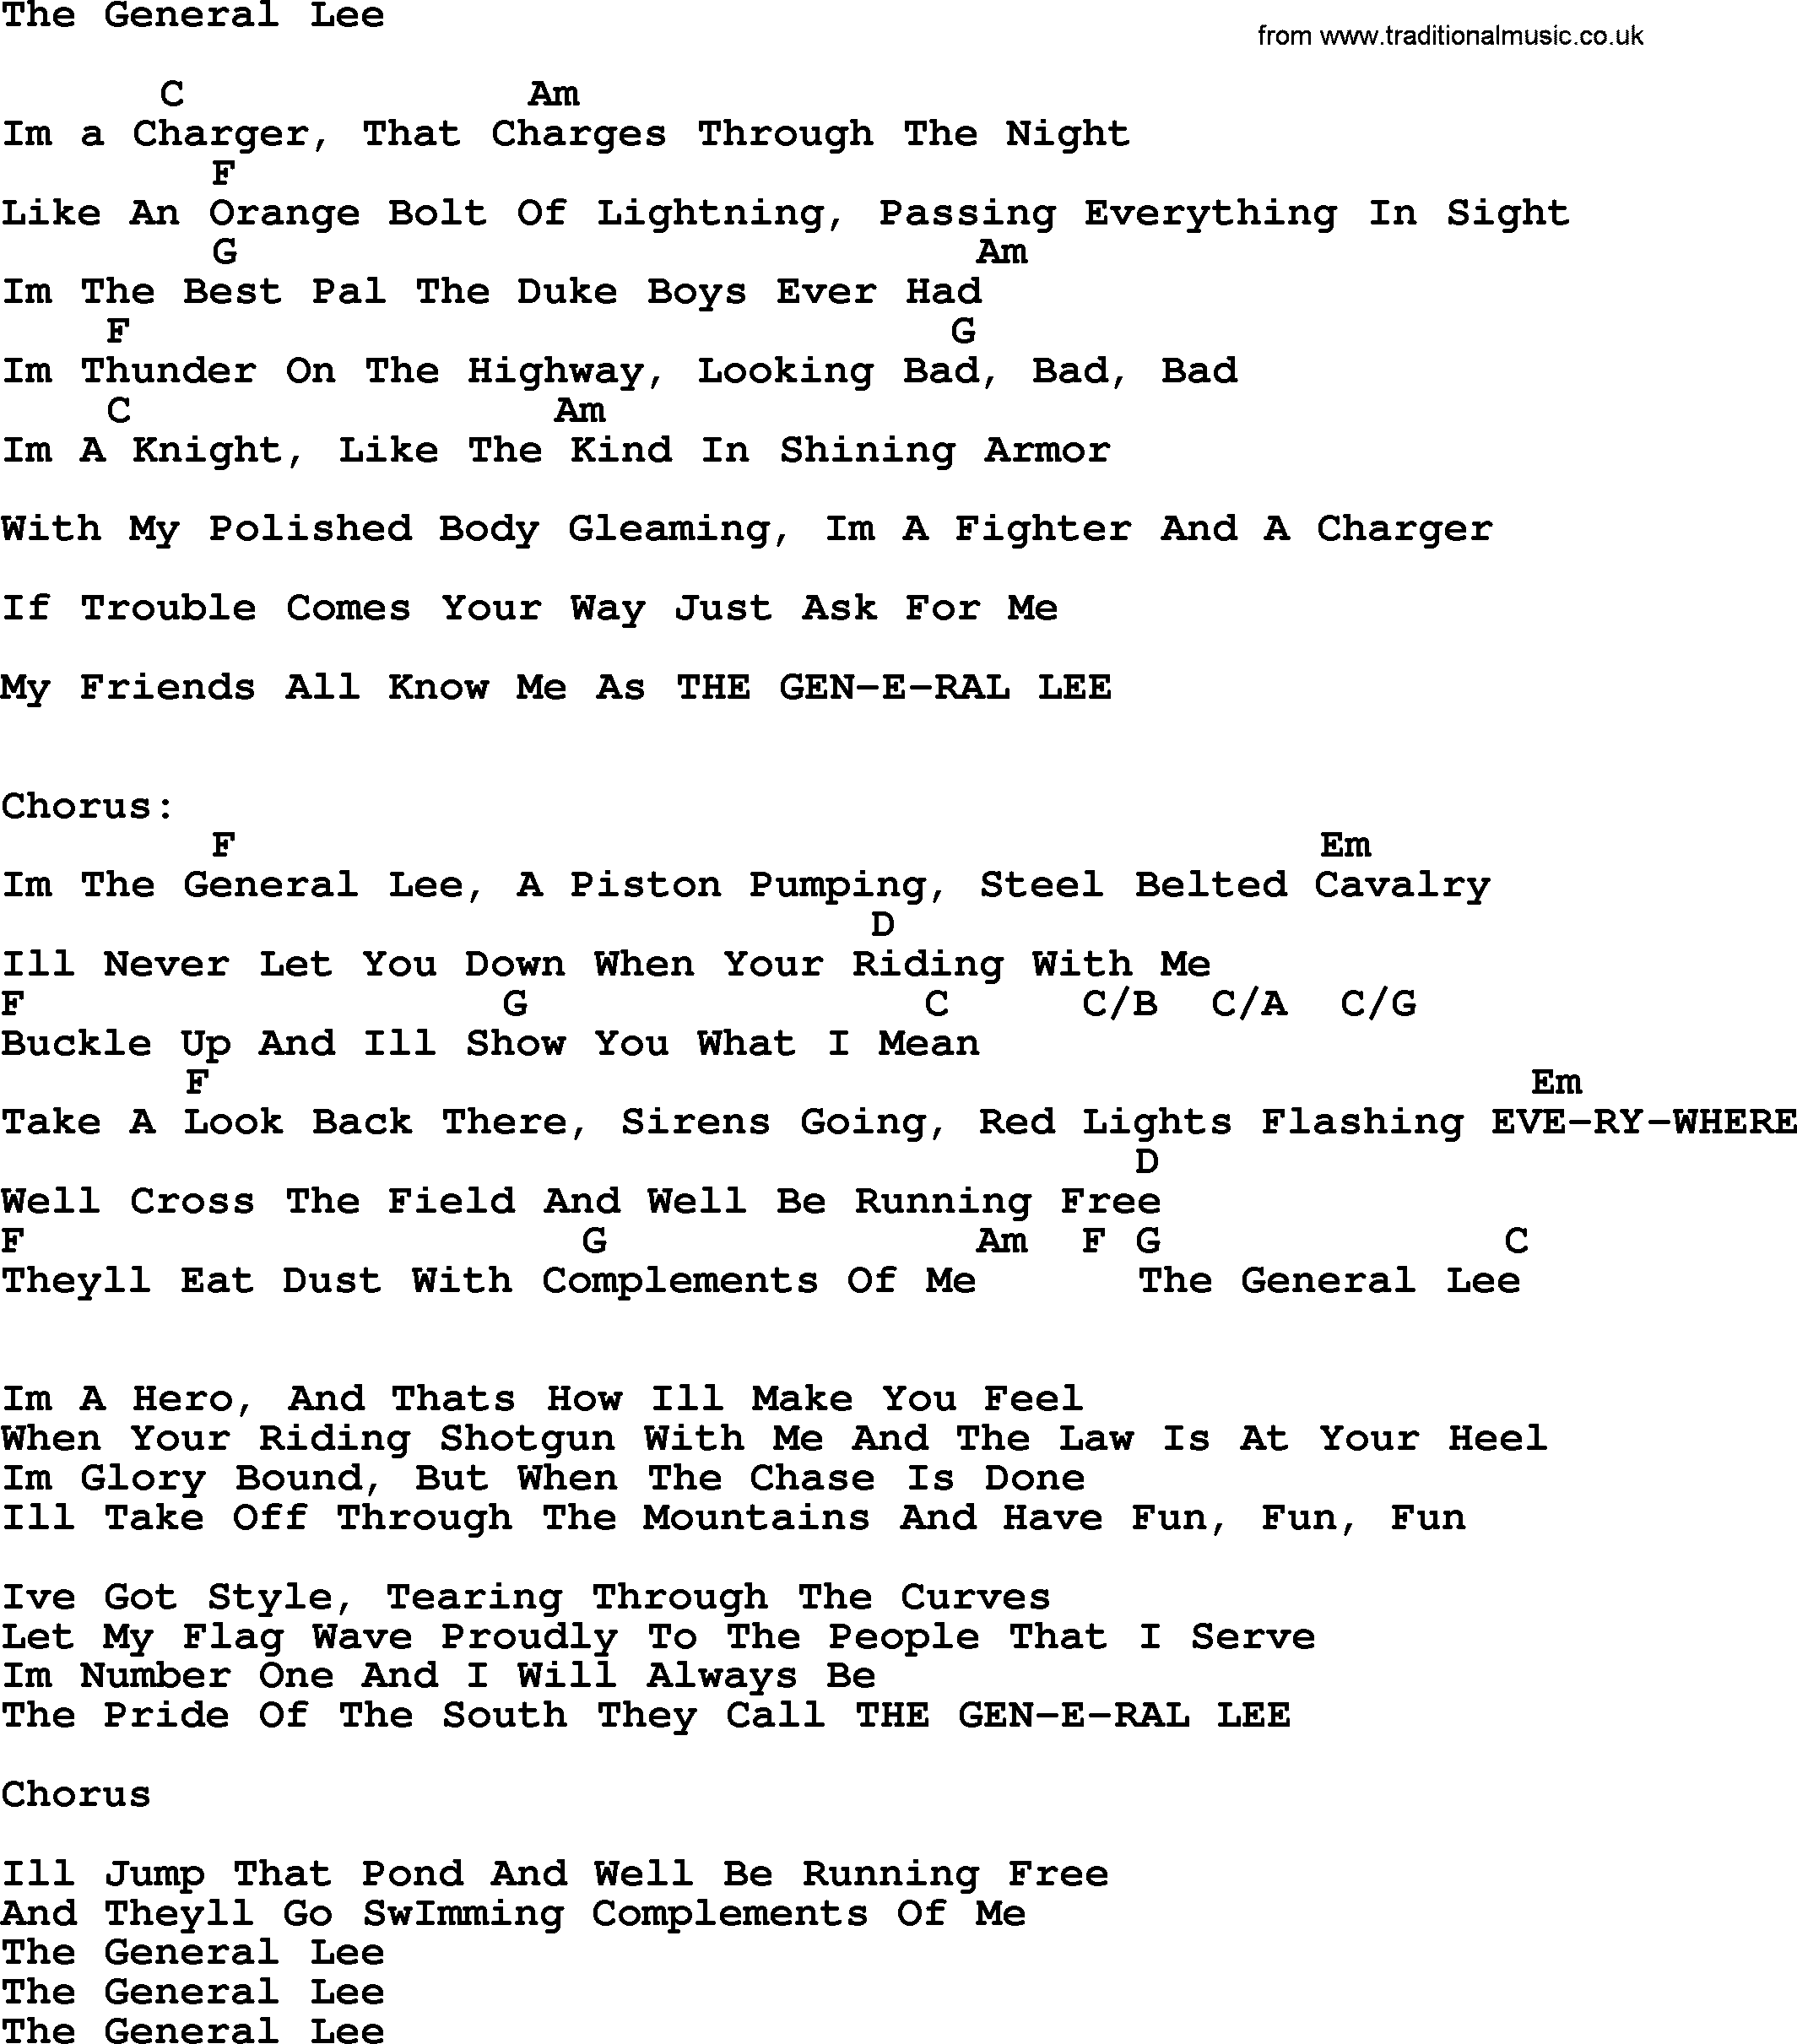 Johnny Cash song The General Lee, lyrics and chords